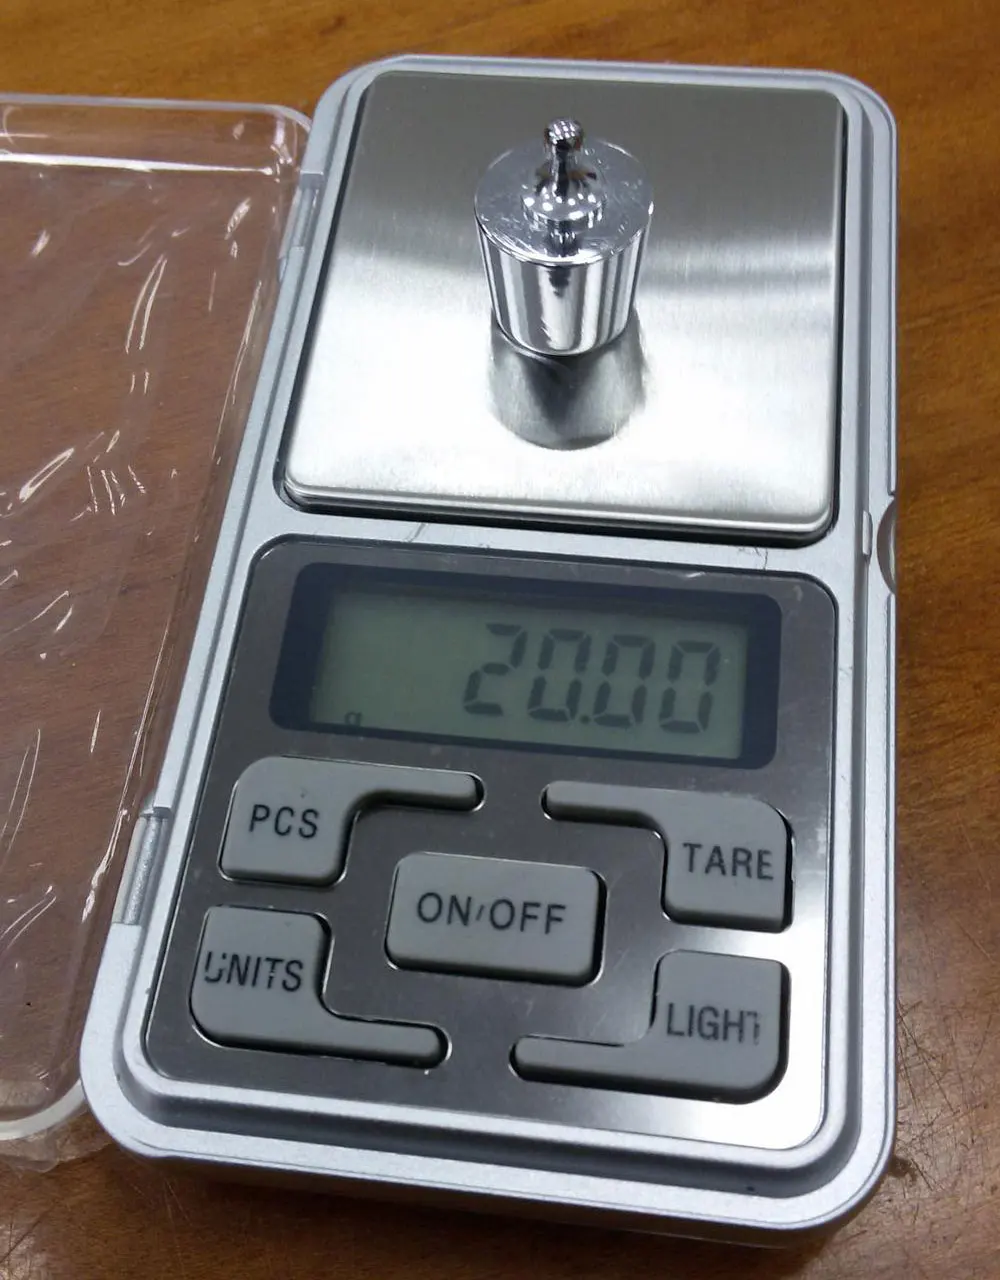 200g/300g/500g x 0.01g / 0.1g / Mini Electronic Pocket Digital Scale for Gold Sterling Silver Jewelry